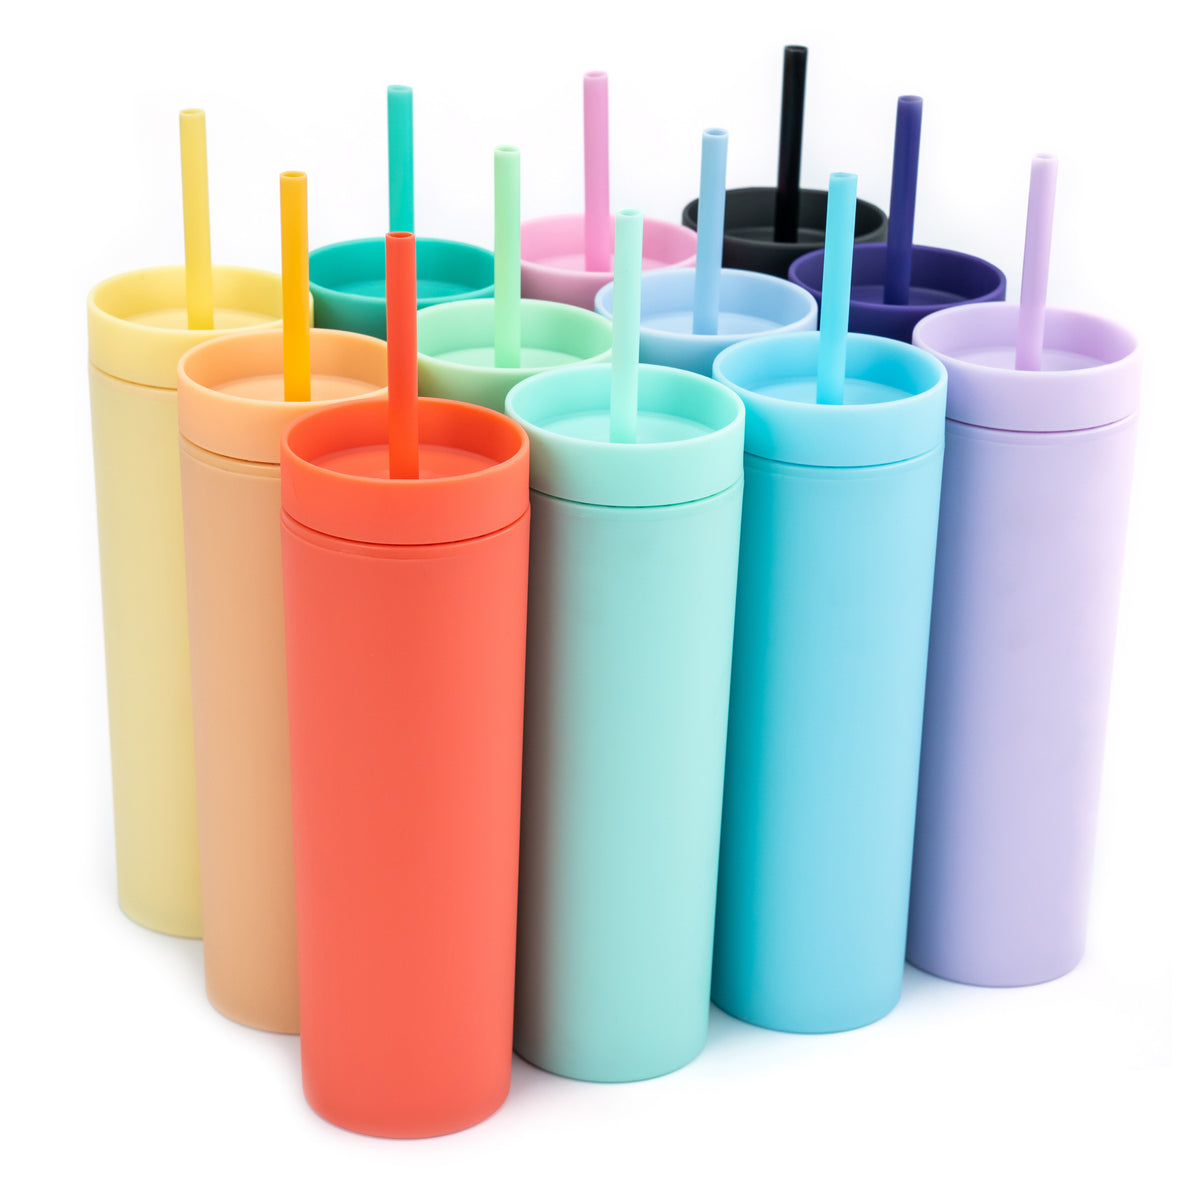 STRATA CUPS Multicolor Skinny Tumblers with Lids and Straws (4 pack) - 16oz  Matte Pastel Colored Acr…See more STRATA CUPS Multicolor Skinny Tumblers